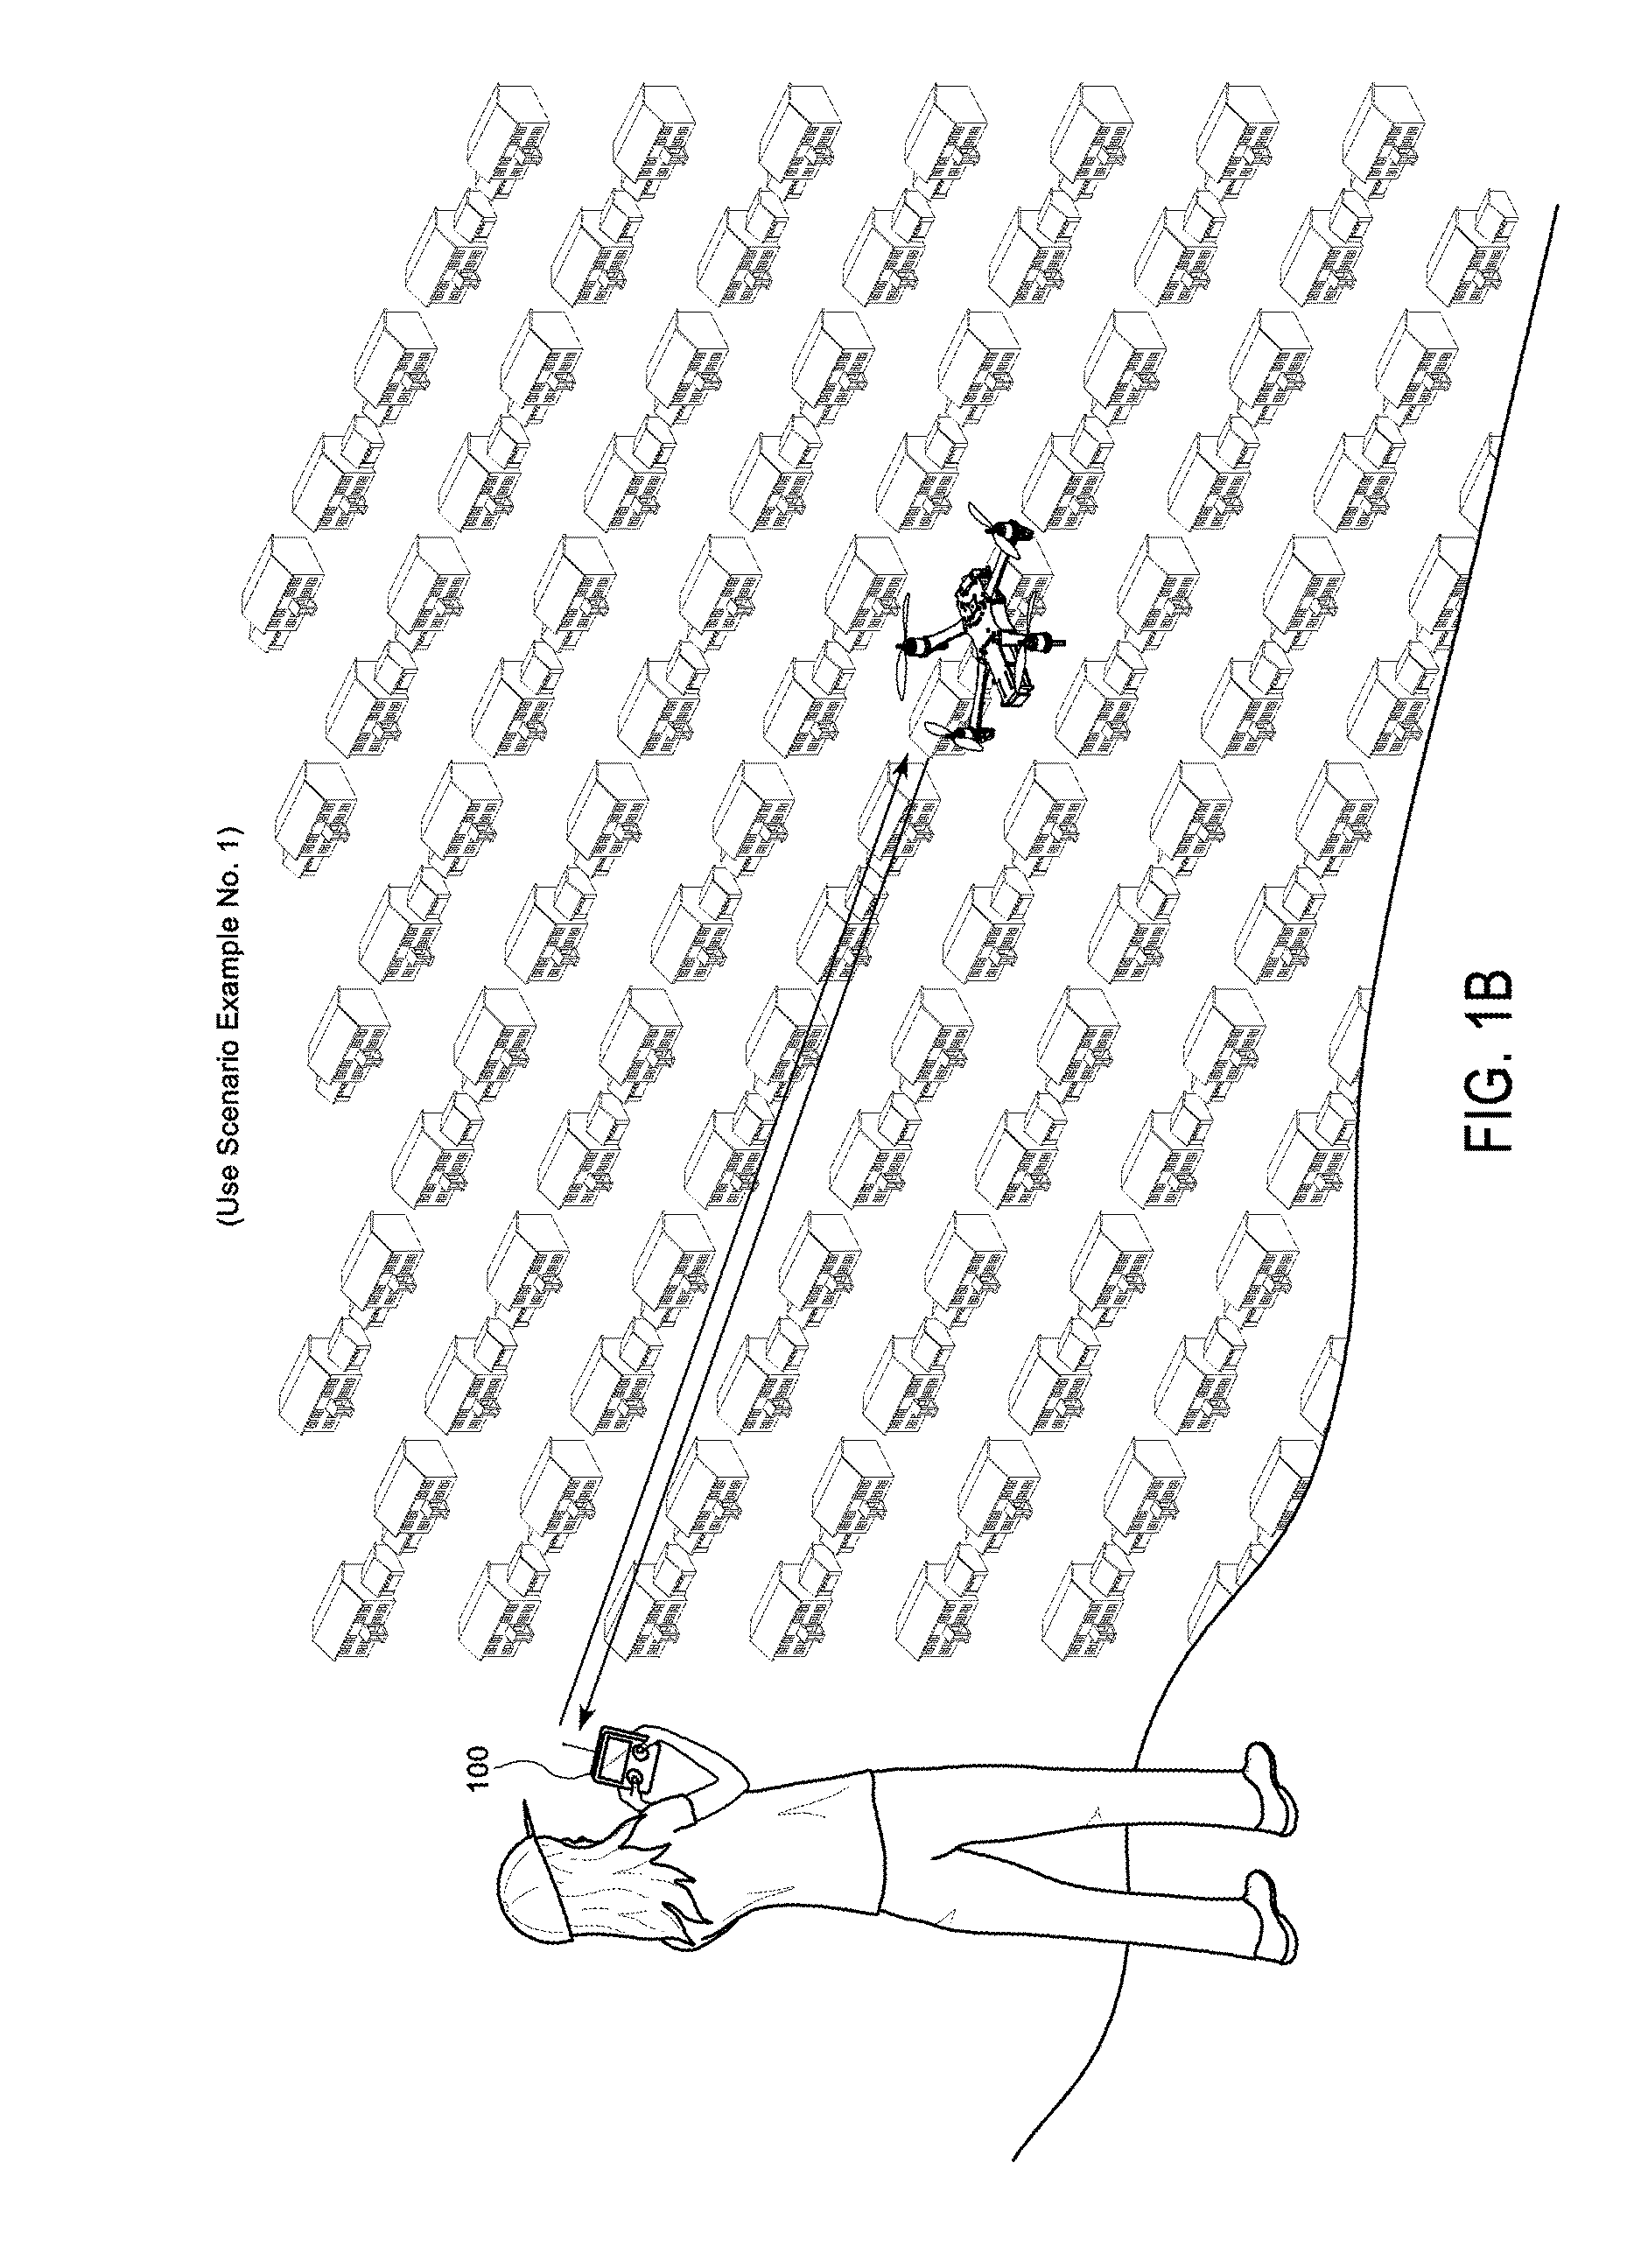 Risk-based flight path data generating system, device, and method